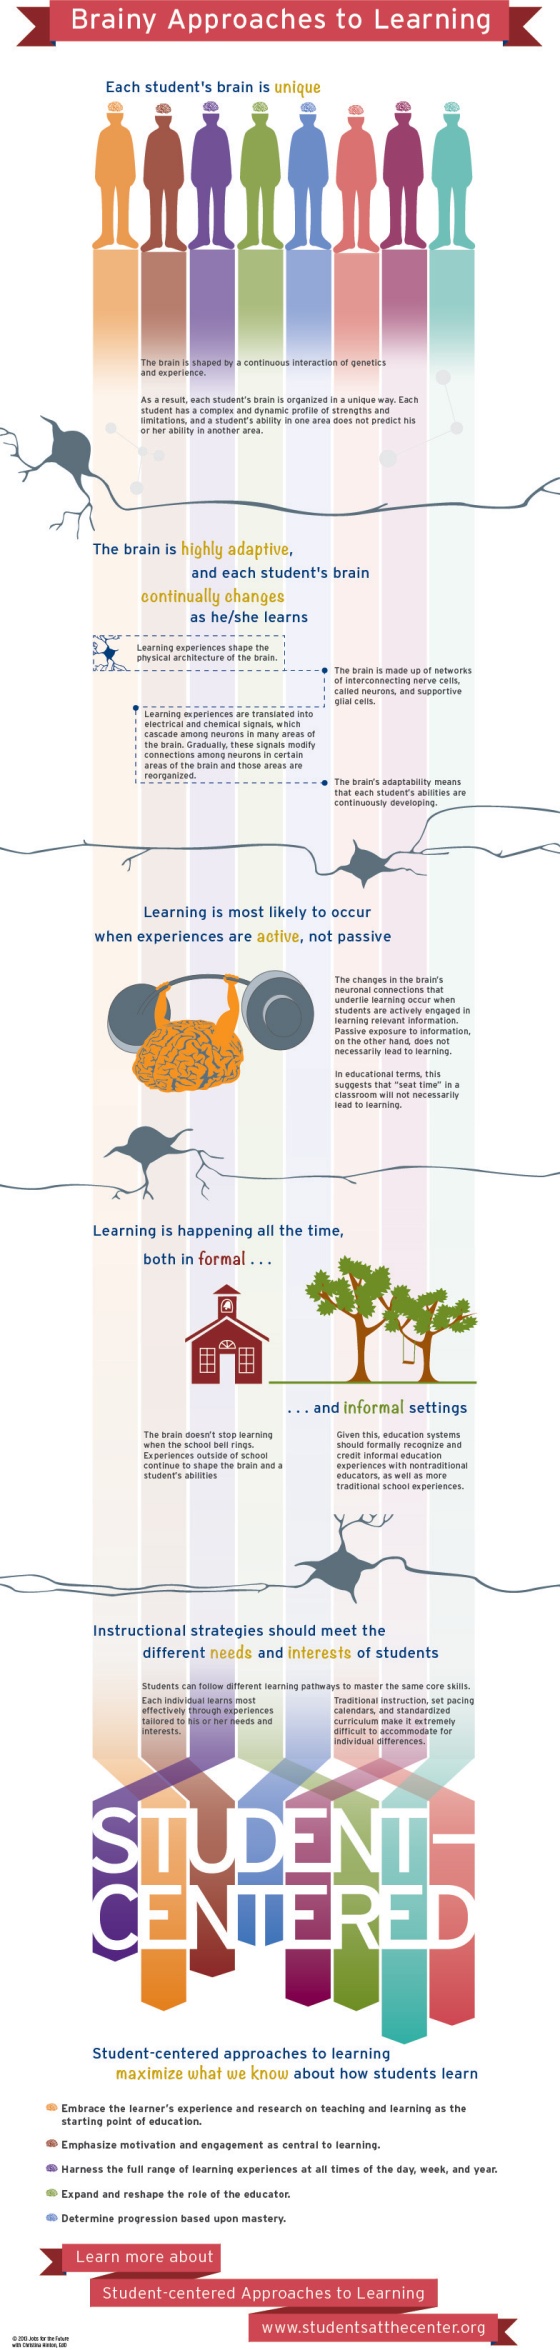 Brainy Approaches to Learning